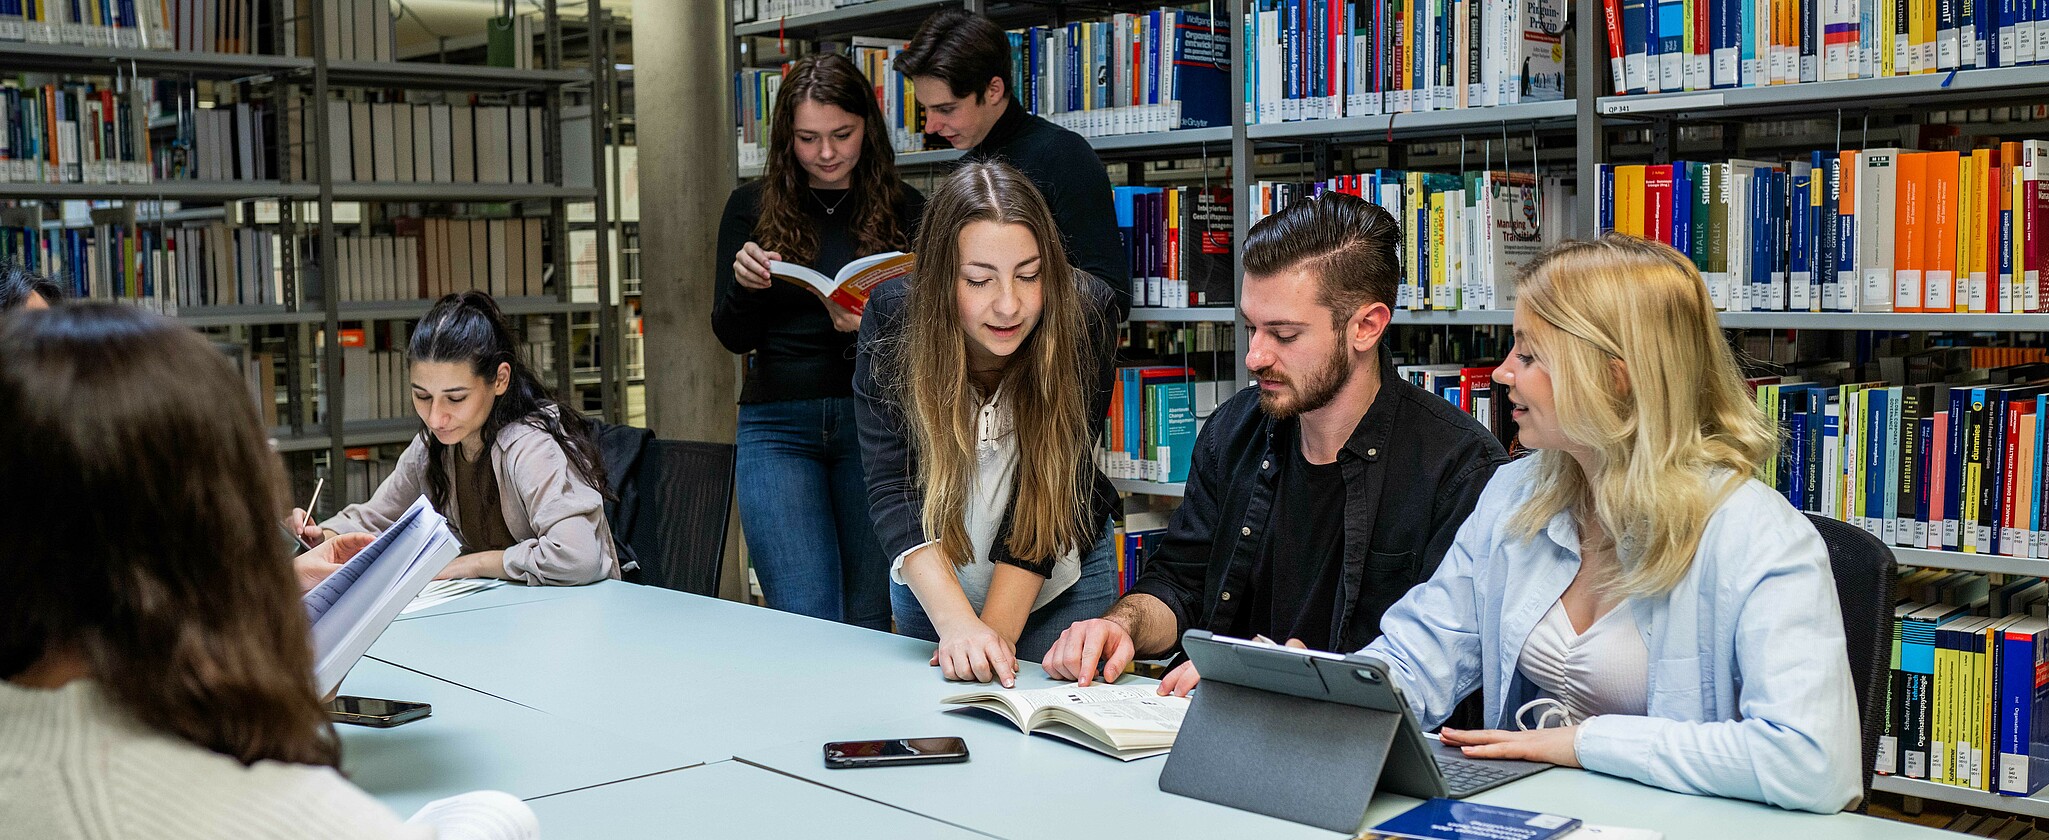 A group of students in the library, with three students sitting in the foreground and studying together.